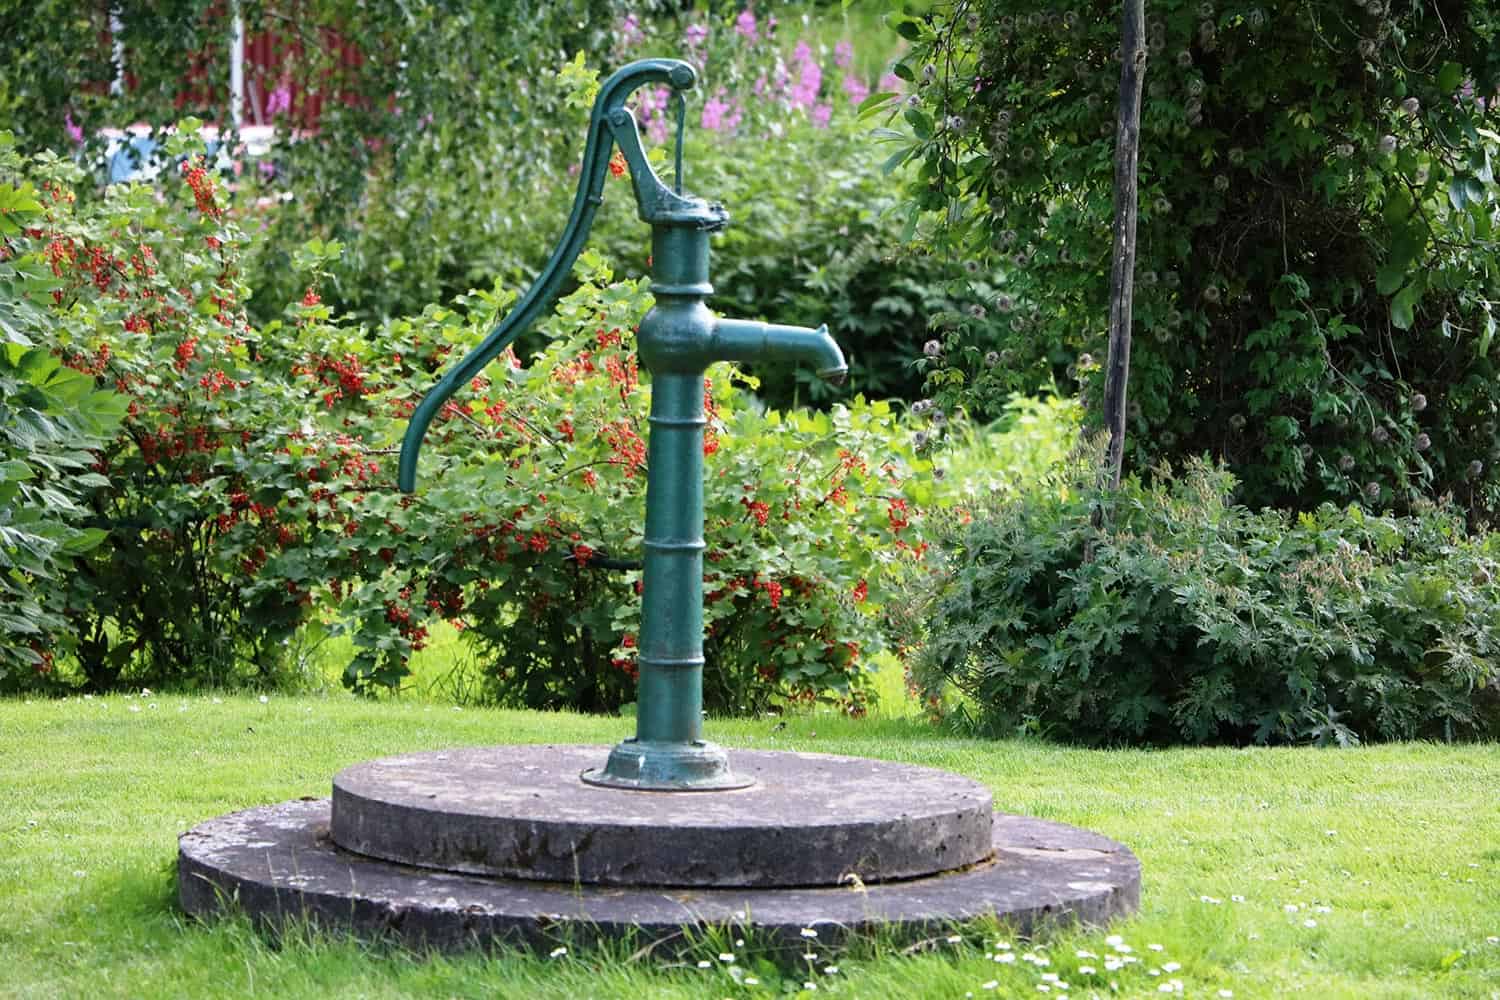 Hand-operated water pump in a garden